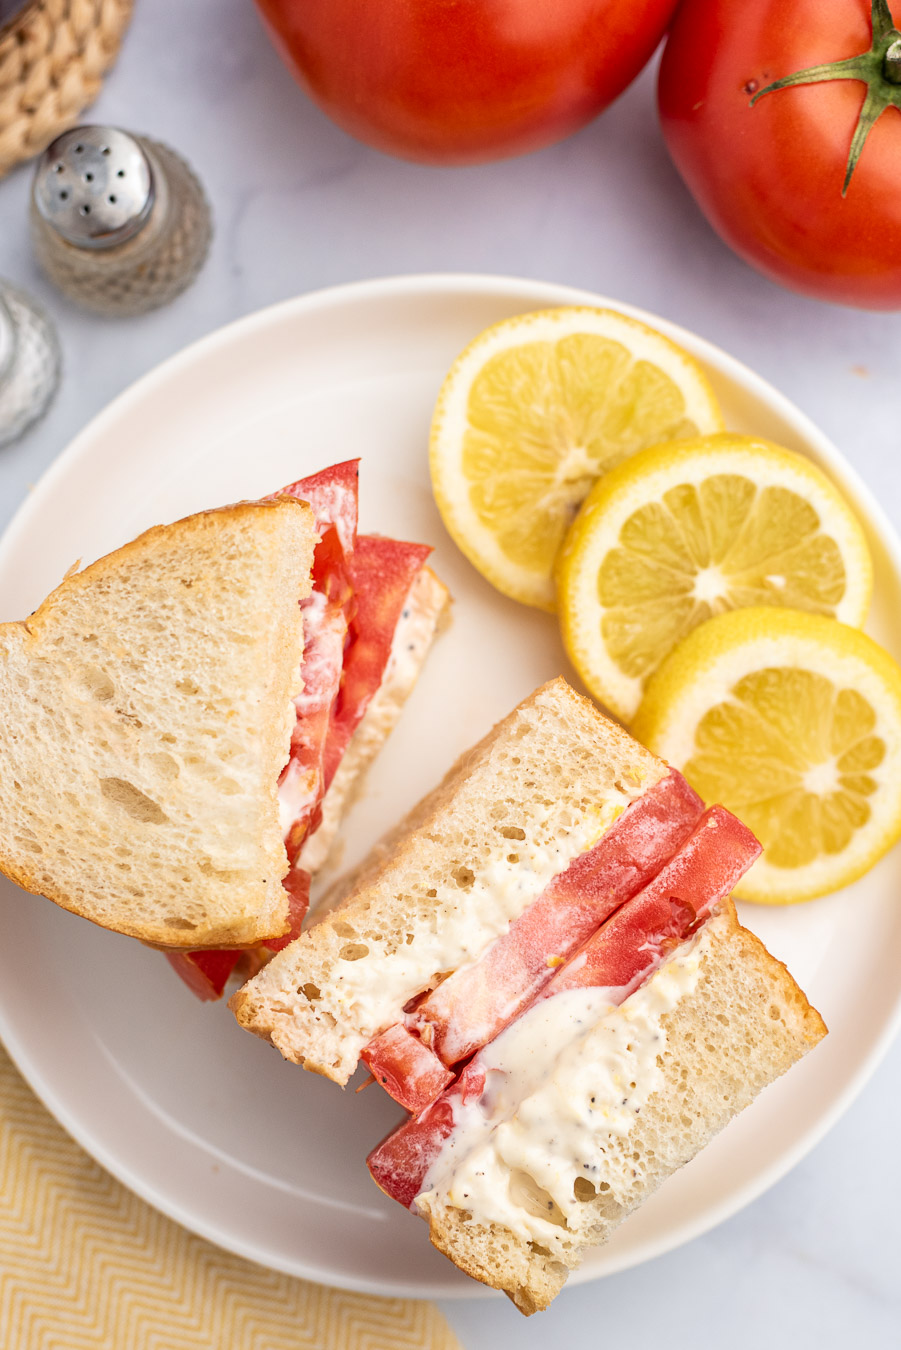 tomato sandwich with a lot of mayo on thick bread, lemon slices on the side